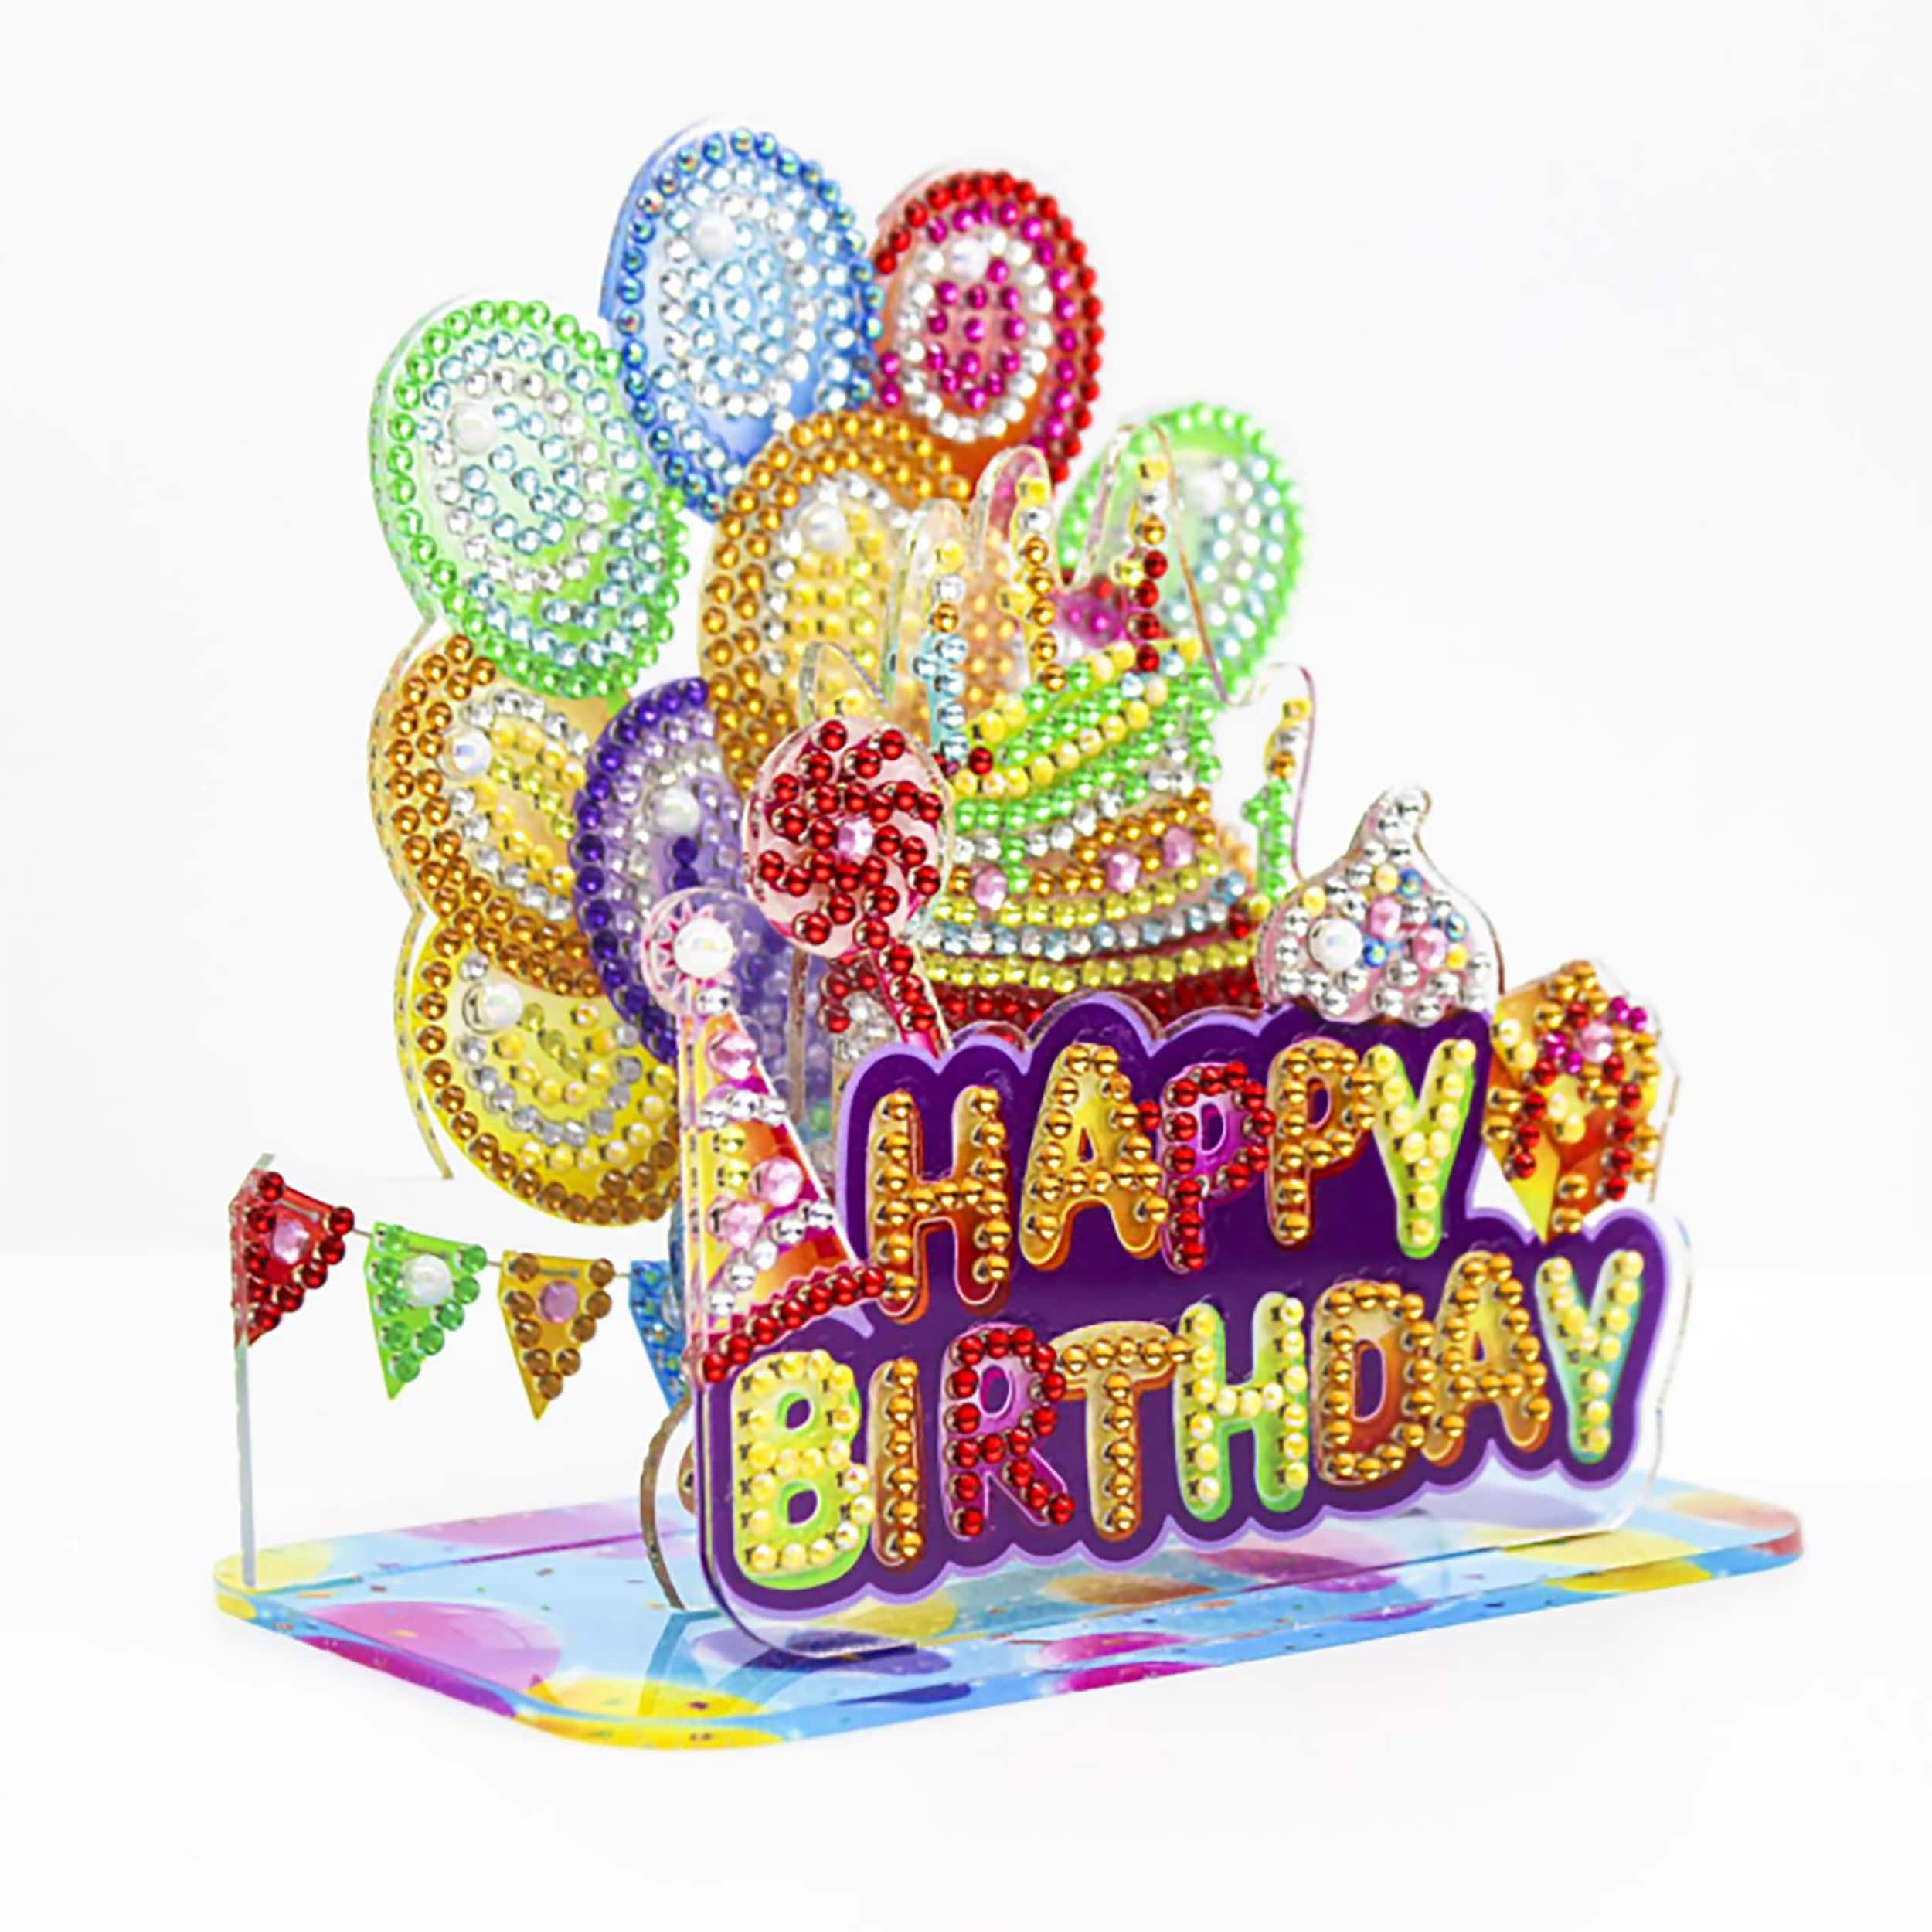 Sparkly Selections Happy Birthday 3D Decoration Diamond Painting